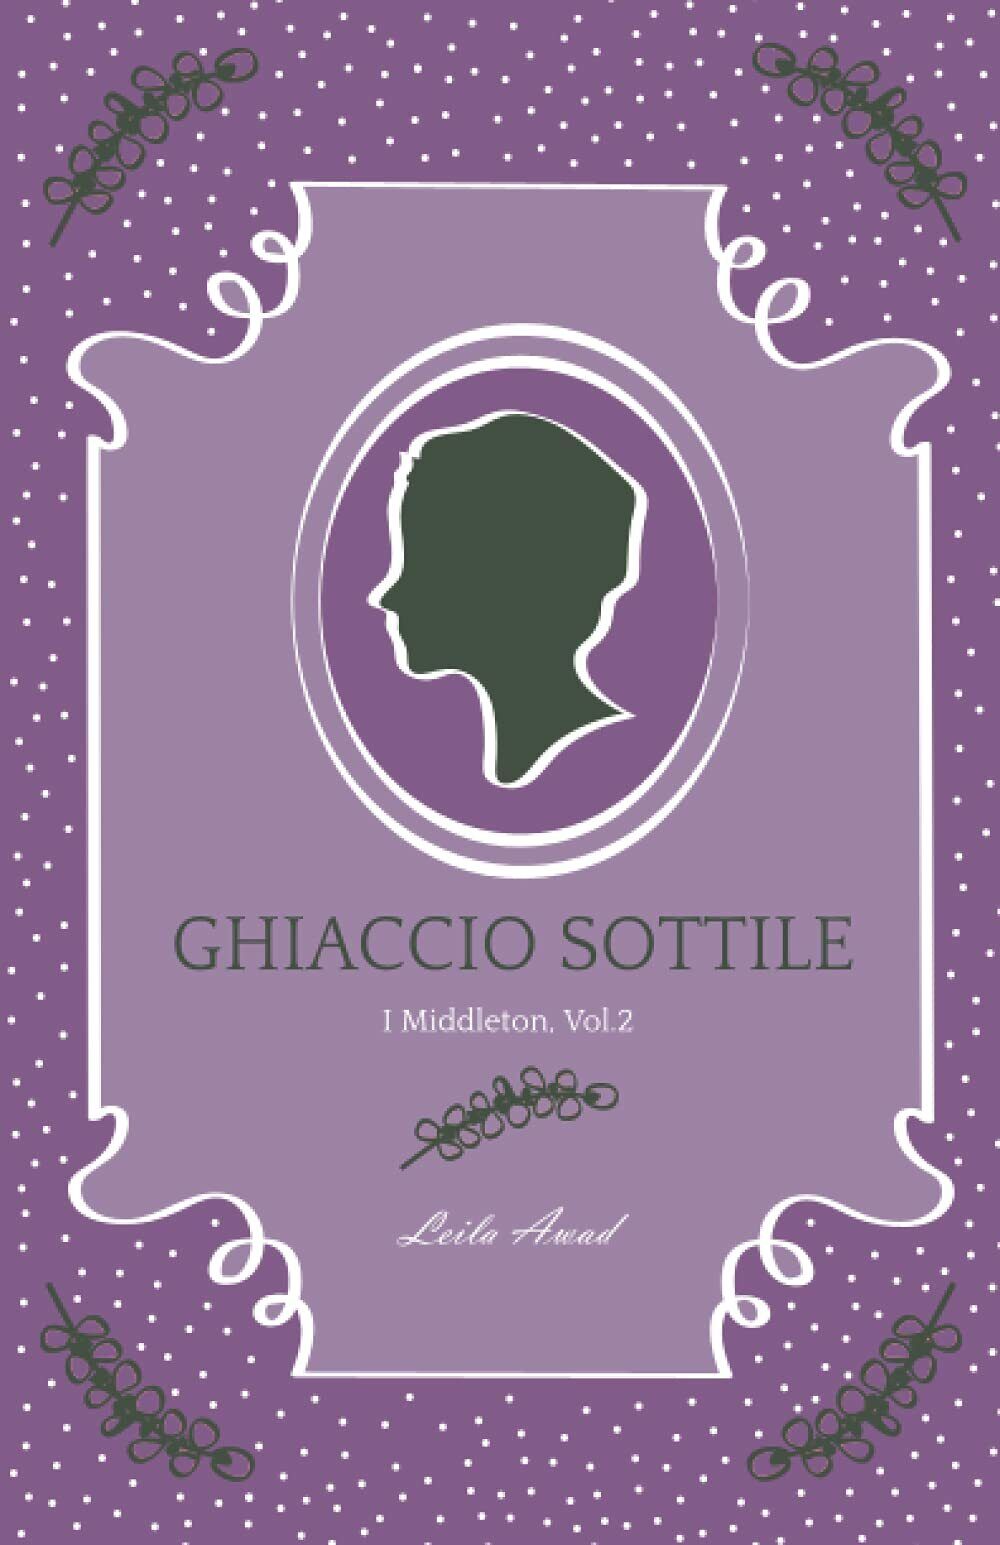 Ghiaccio Sottile: (I Middleton Vol. 2) di Leila Awad,  2021,  Indipendently Publ